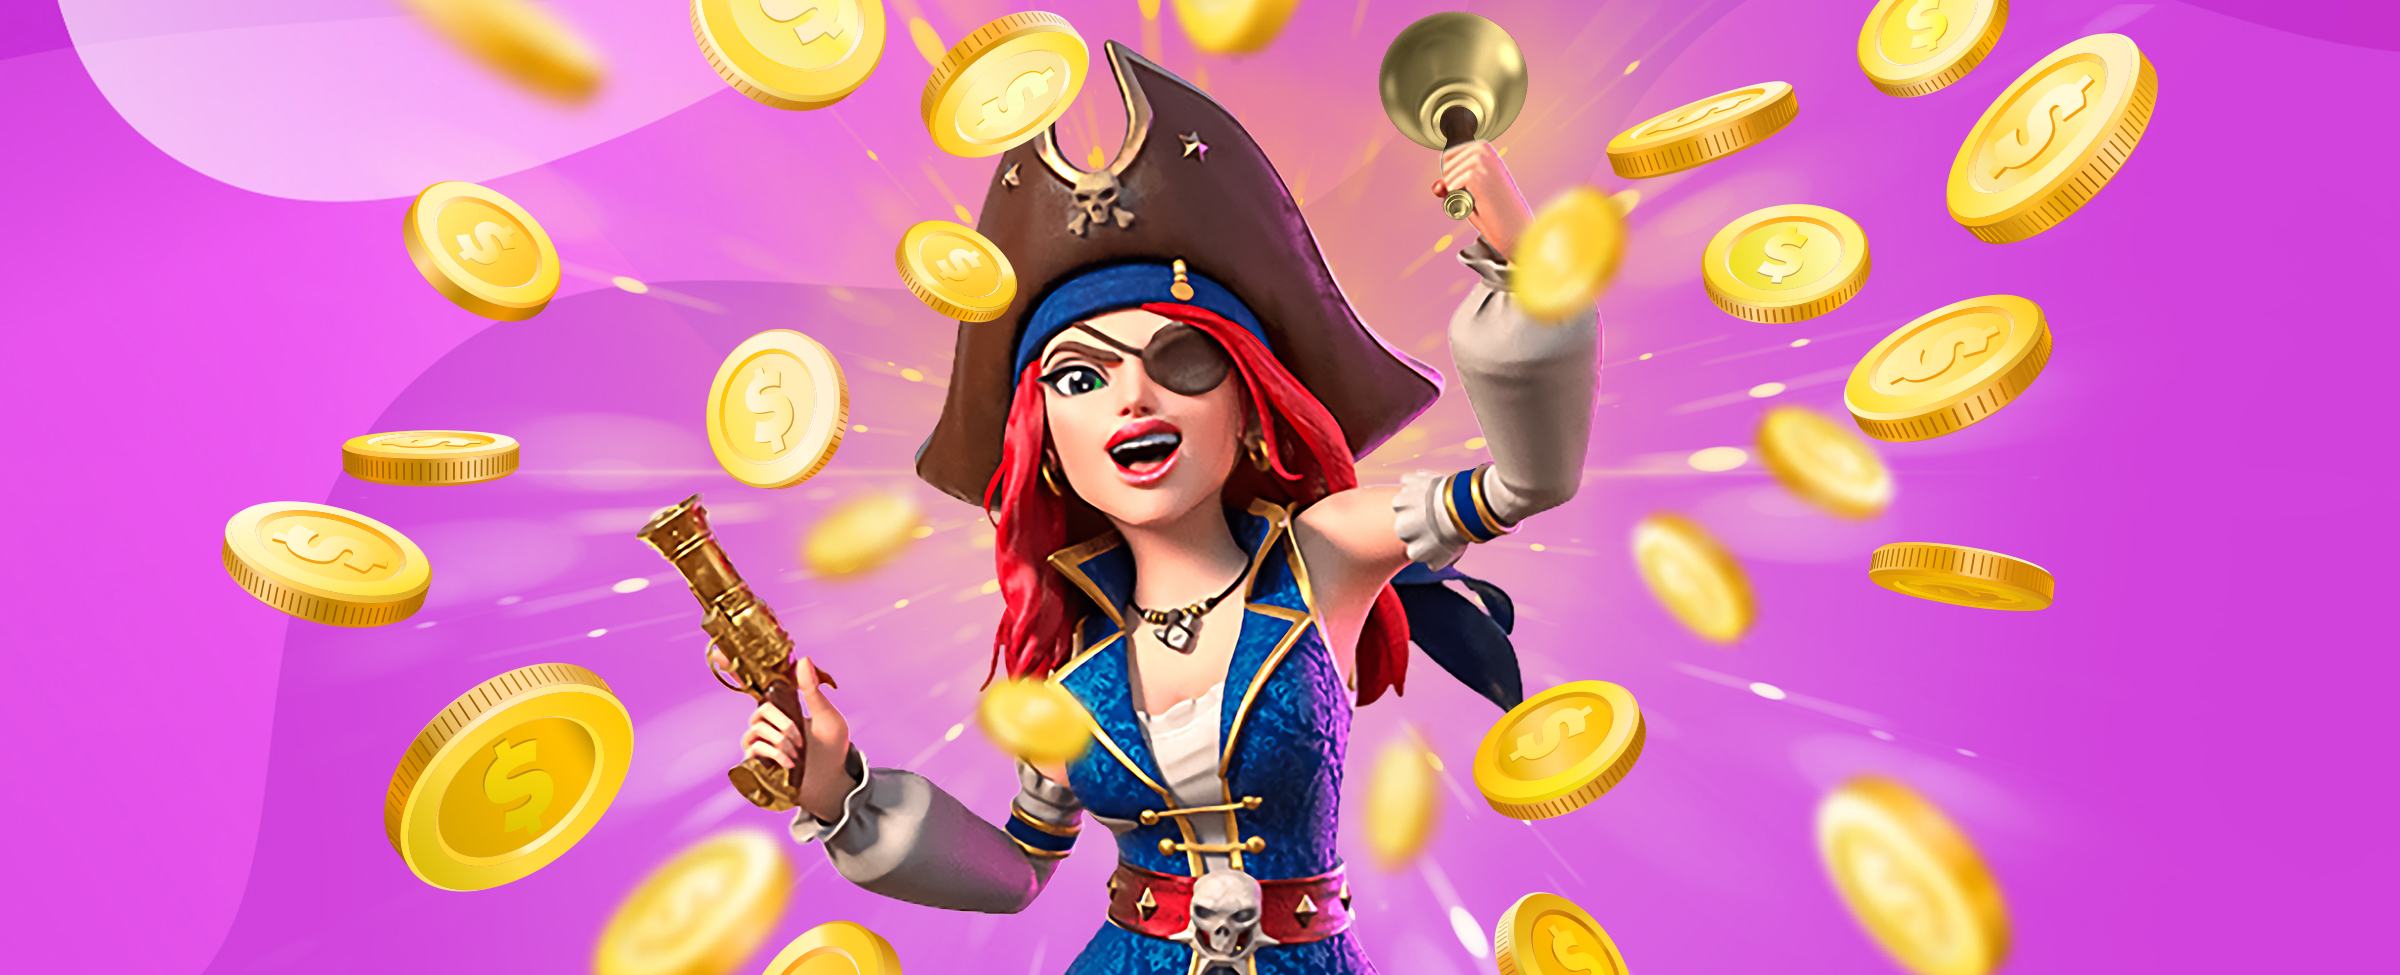 A cartoon female pirate holding a pistol and a bell stands in a battle position among exploding gold coins, set against a purple background.